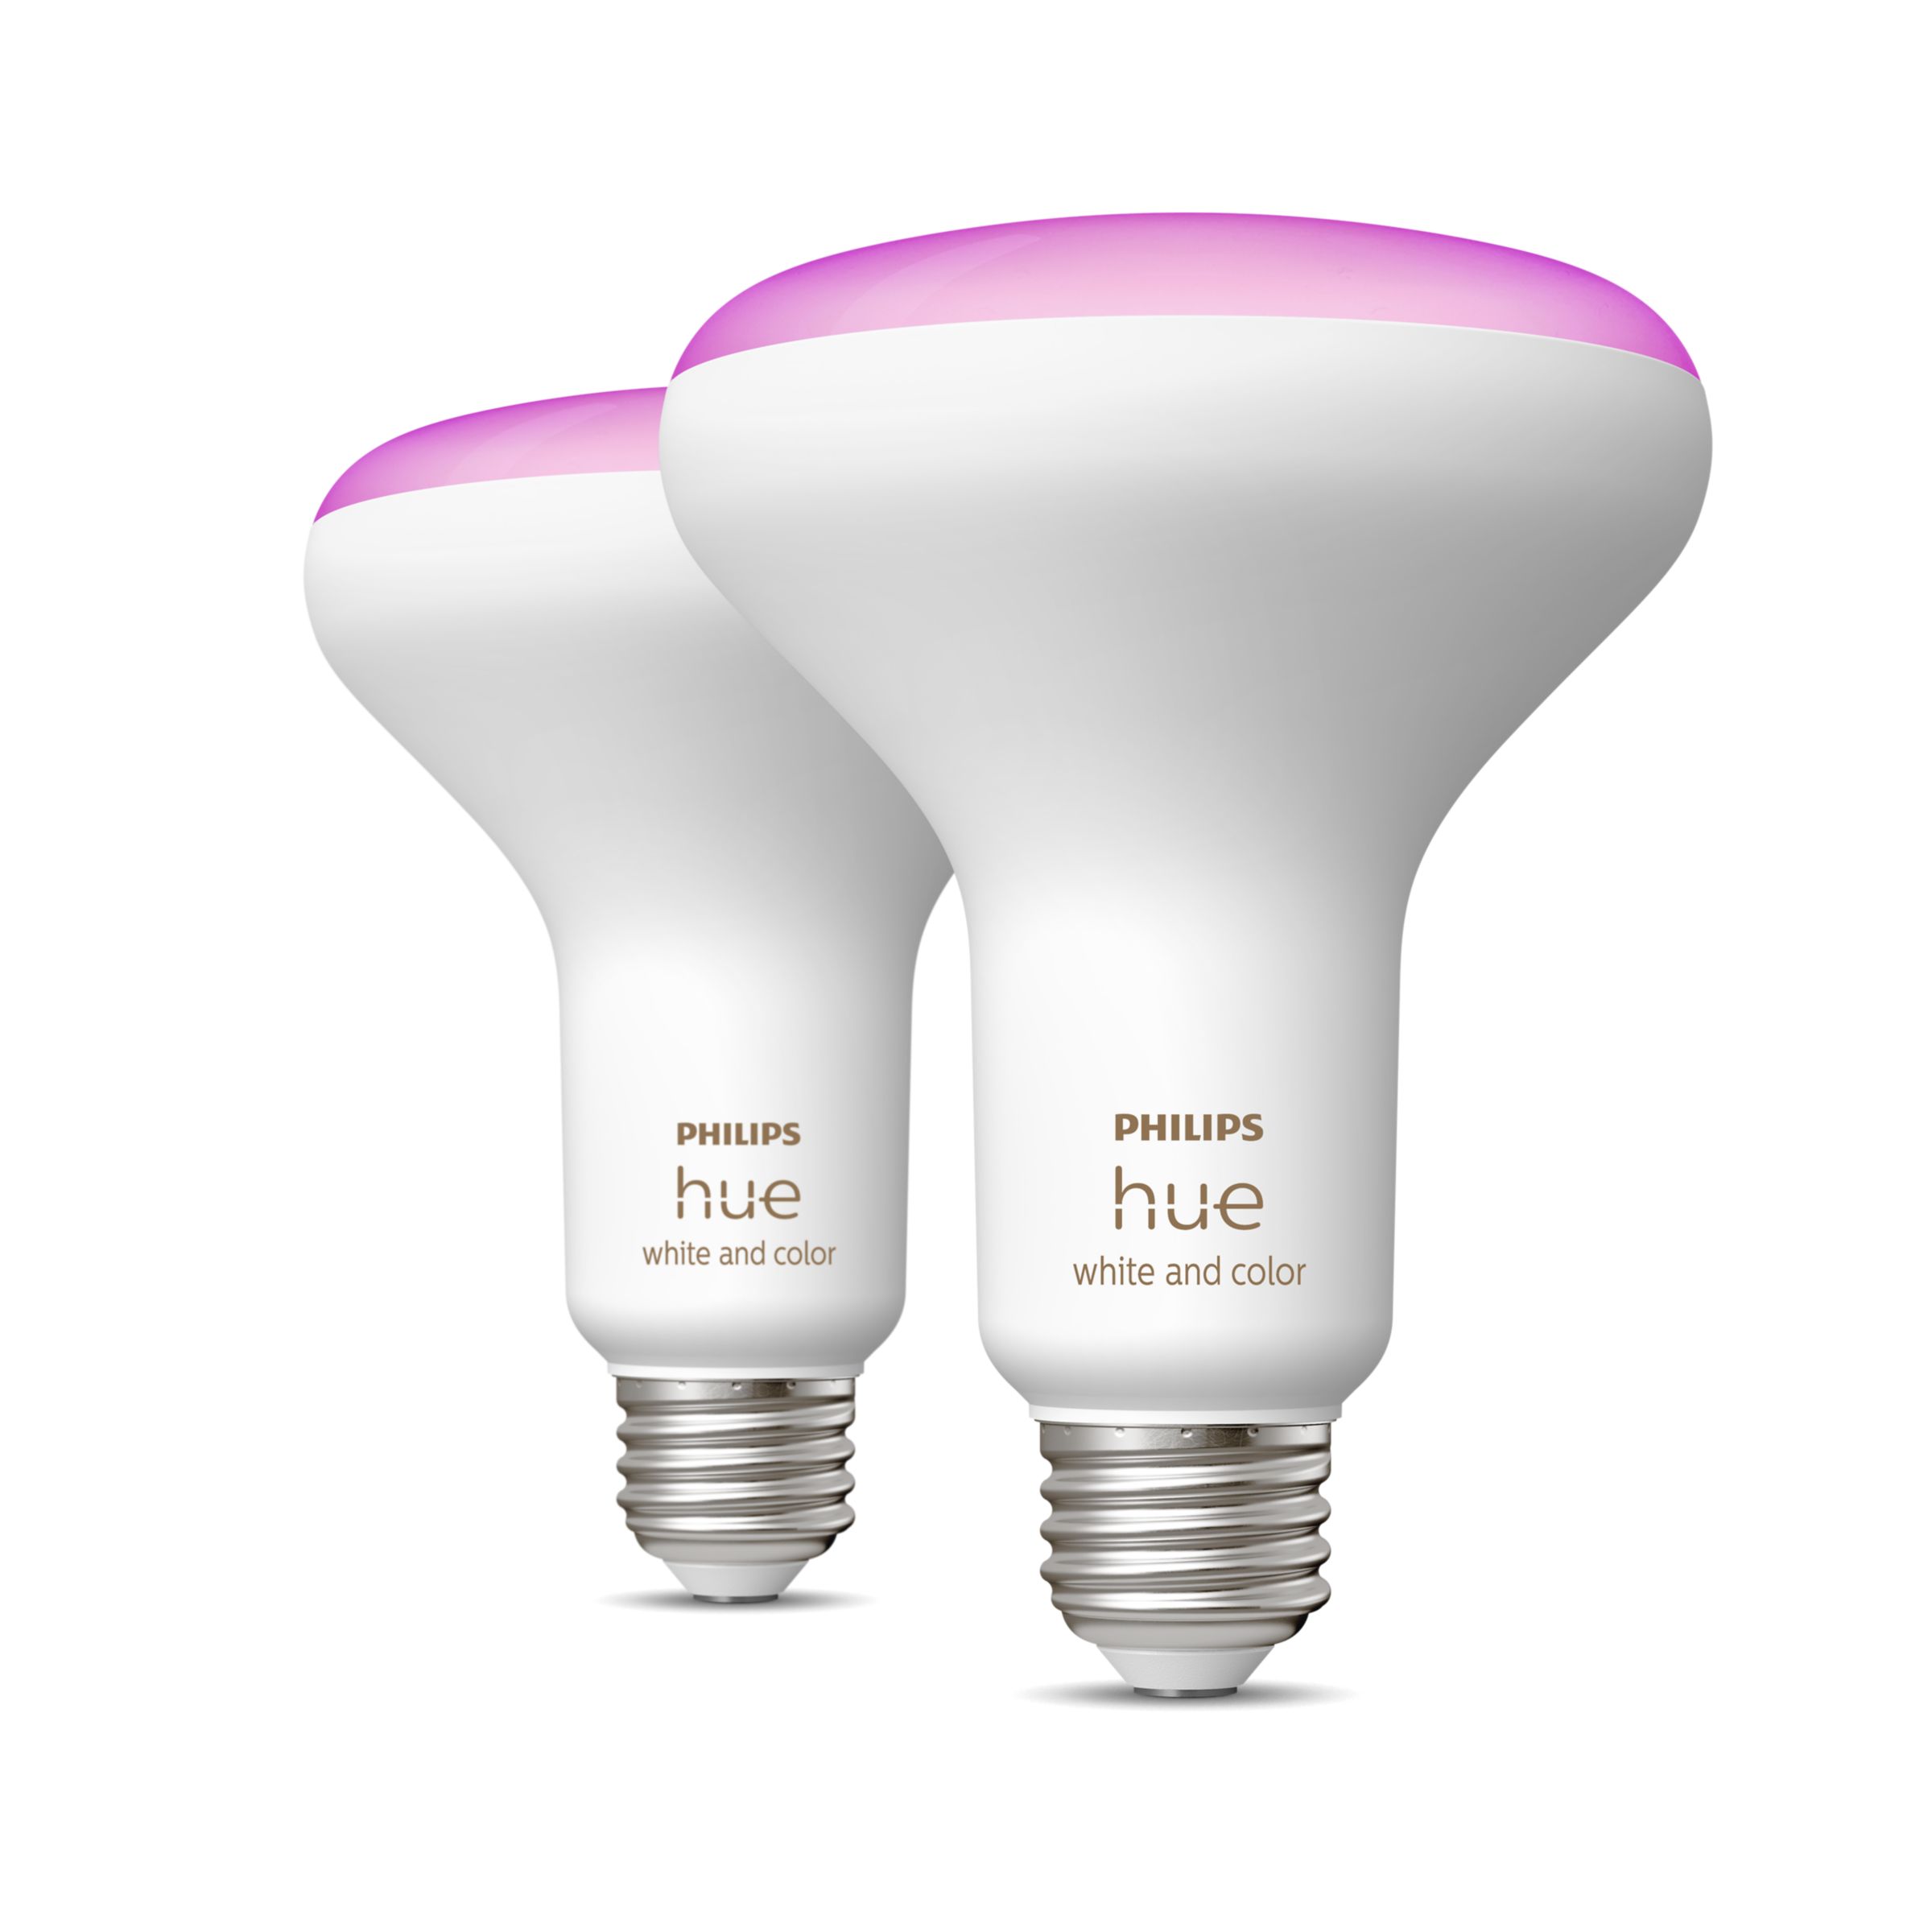 Philips Hue White and Colour Ambiance GU10 LED Smart Bulb, Bluetooth &  Zigbee, (Hue Hub Optional), voice activated with Alexa, A Certified for  Humans